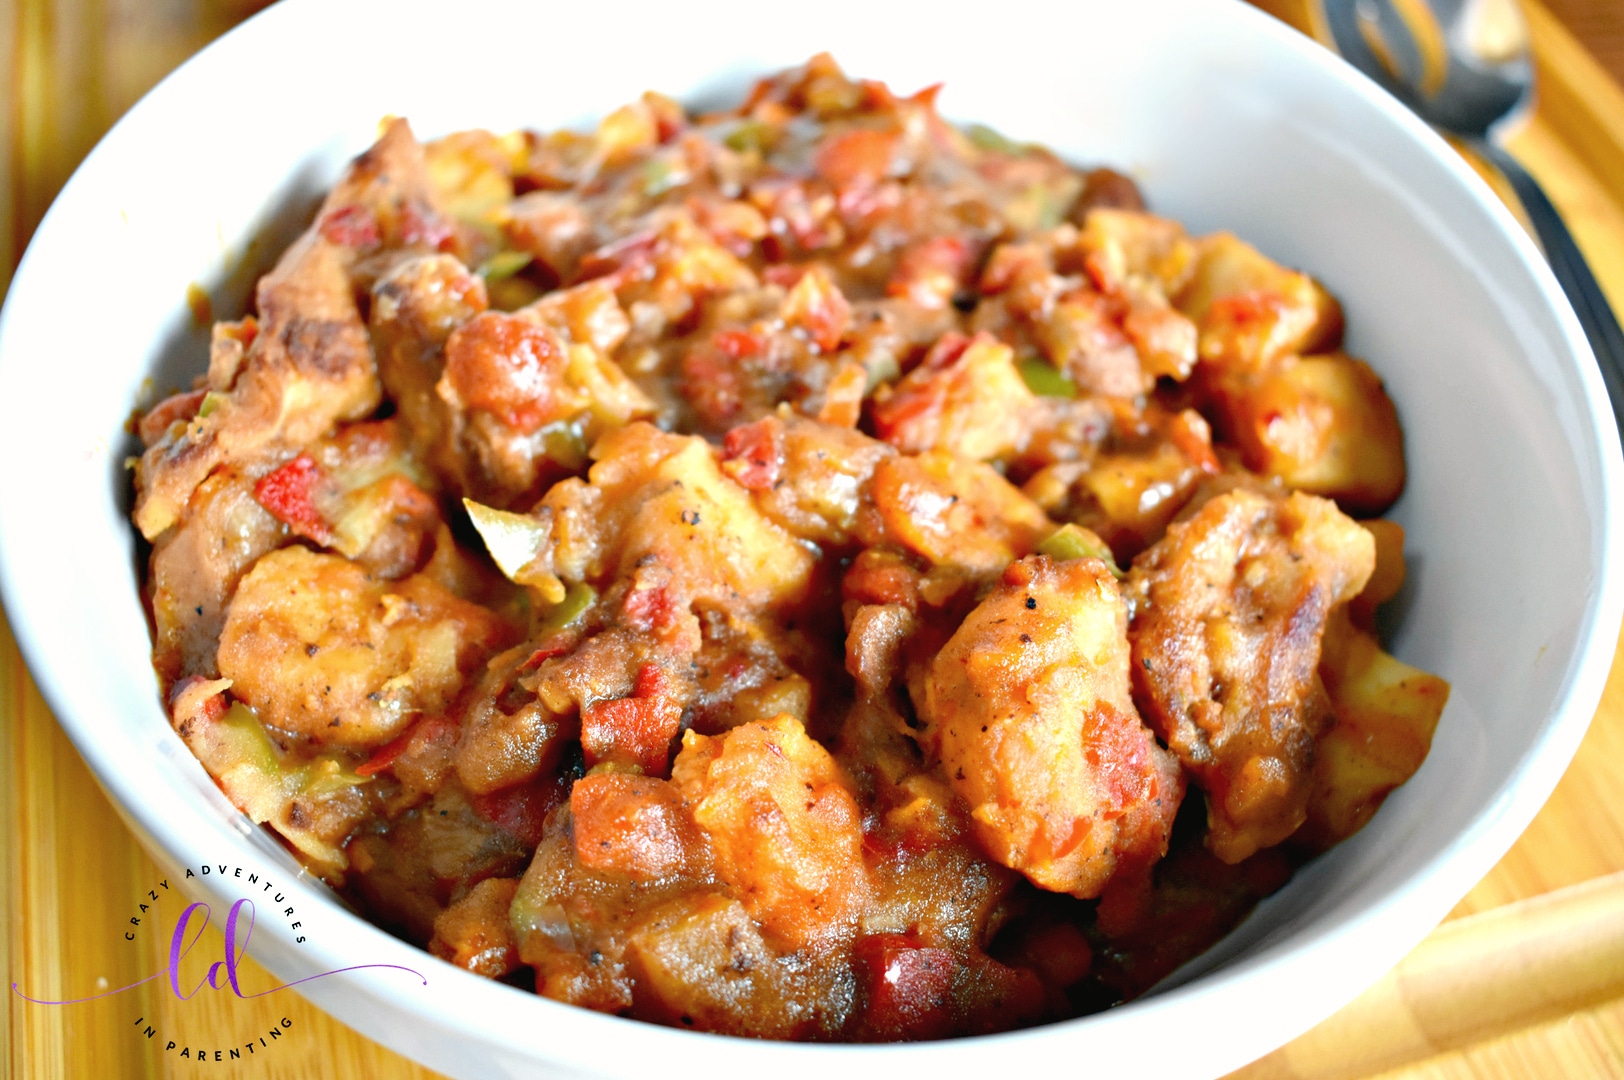 Tyson Sweet Chipotle Chicken & Vegetable Hash Bowl